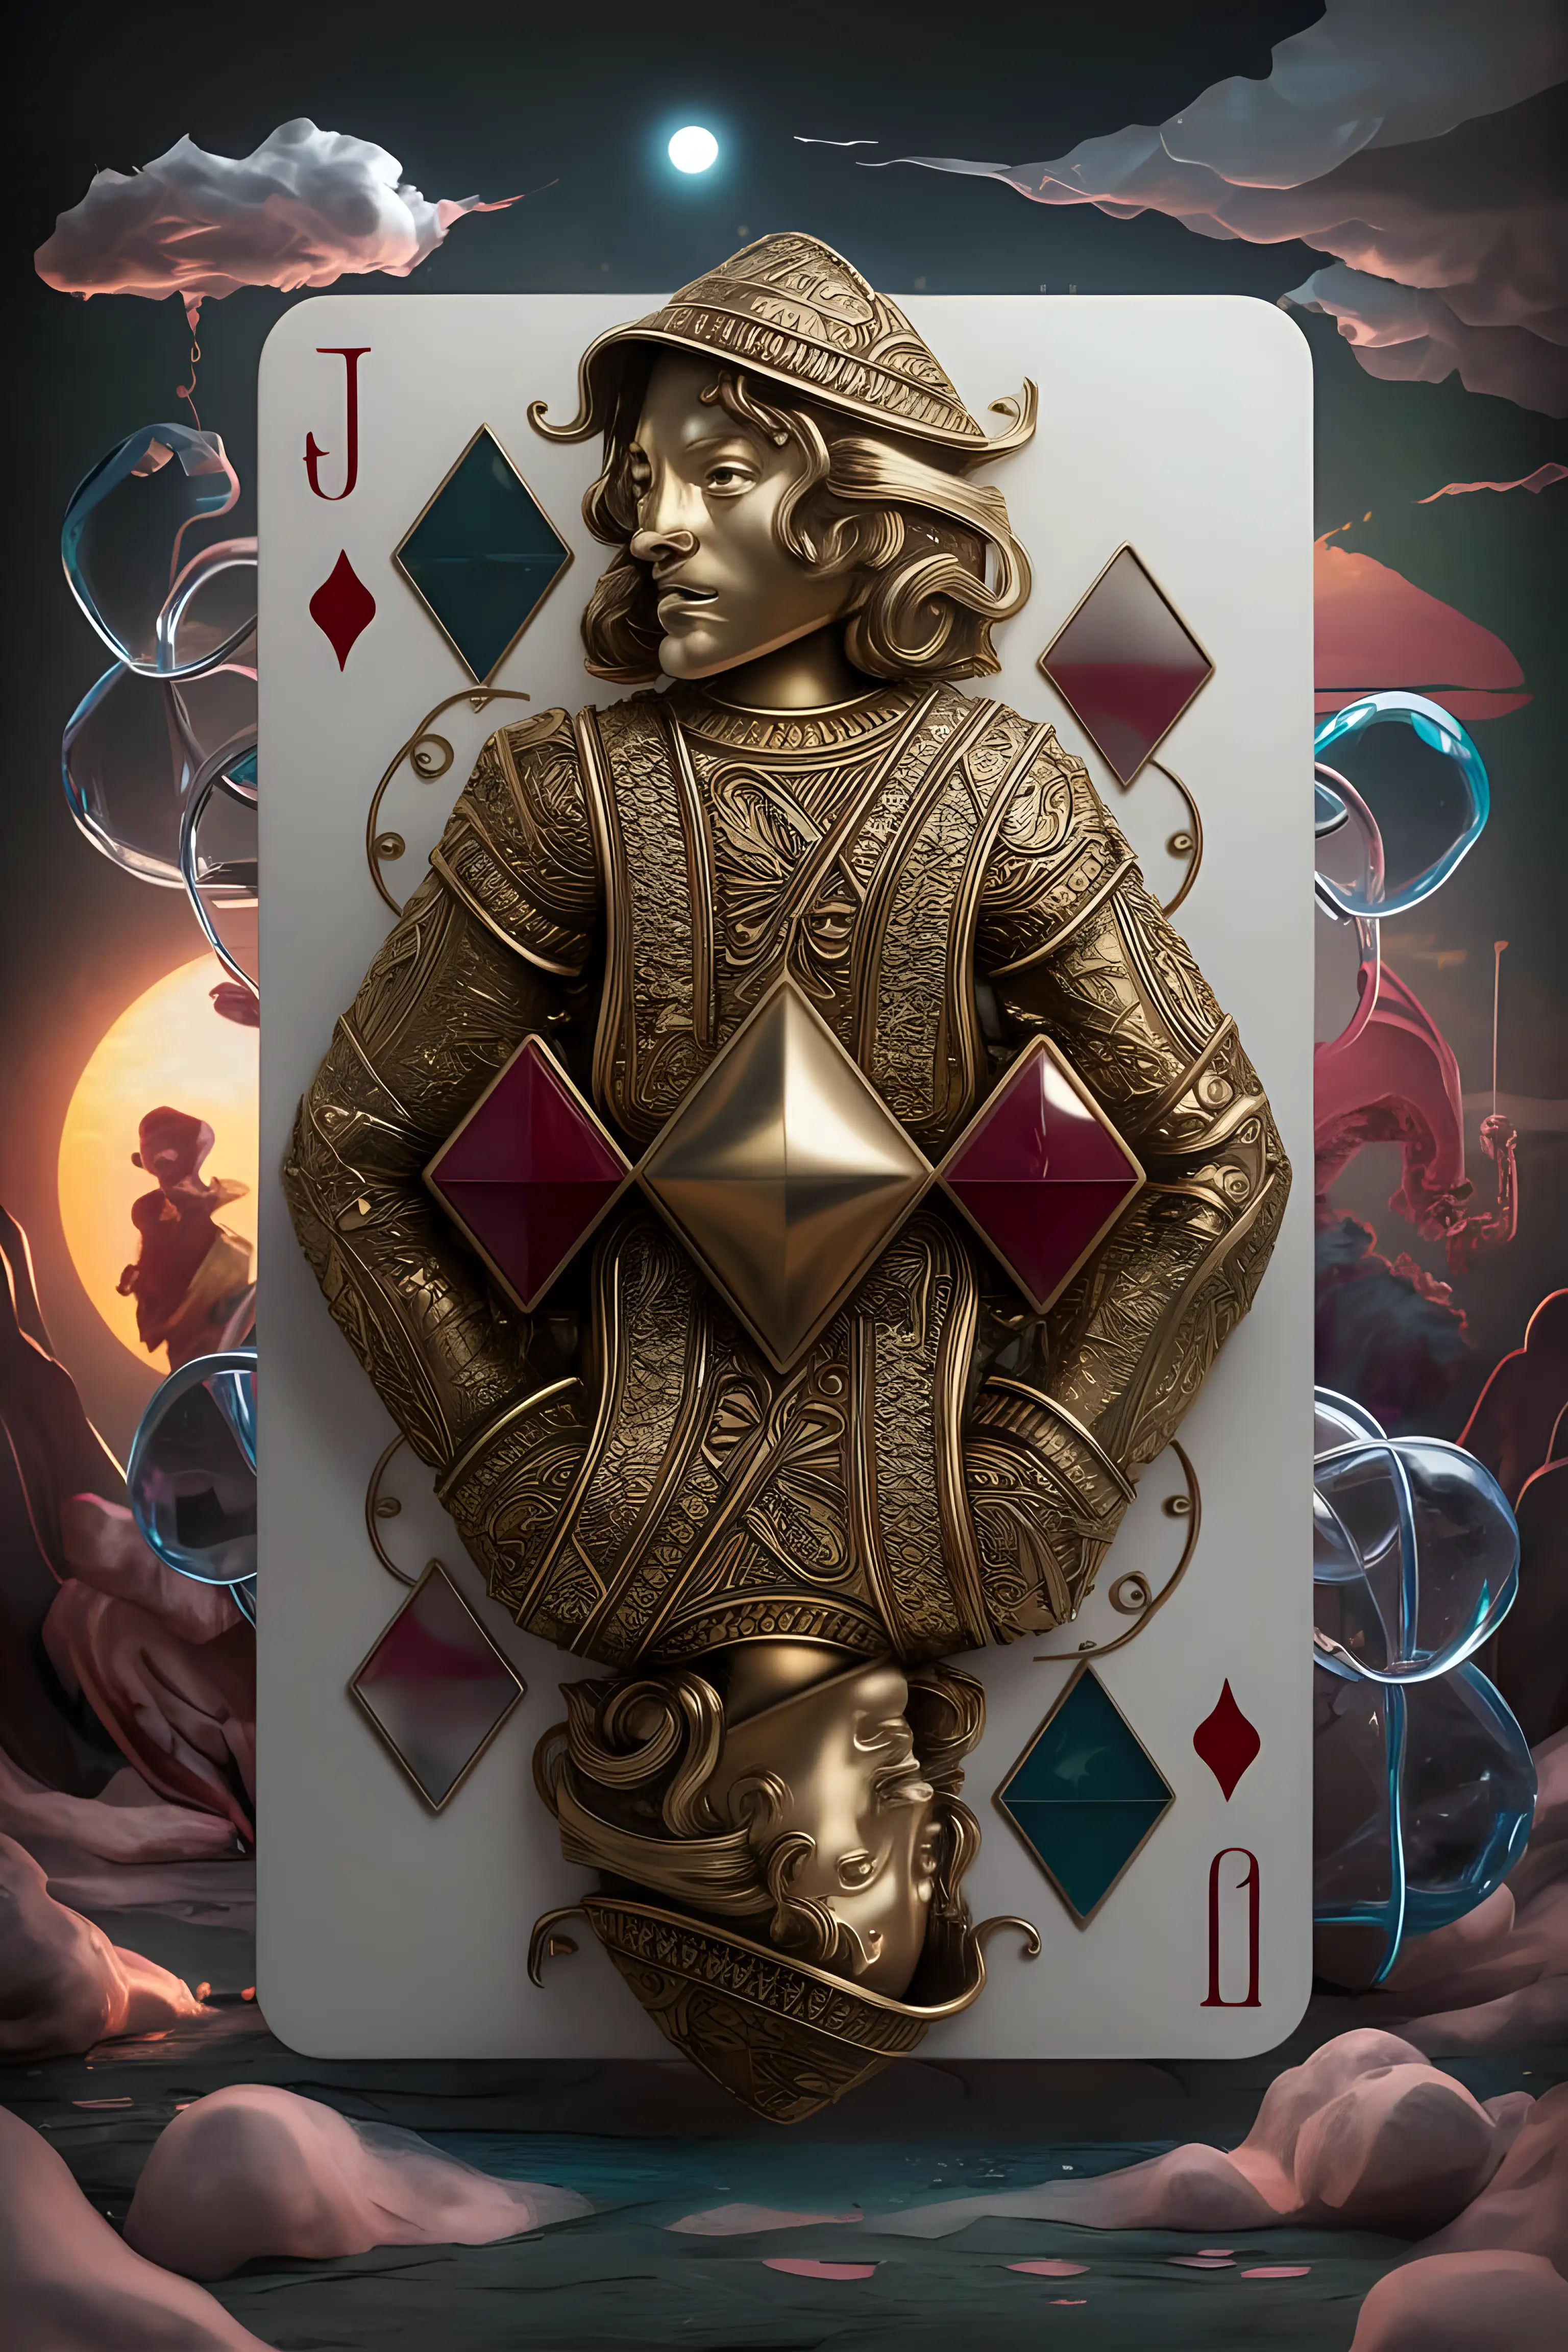 An intricate illustration style design of a Jack of Diamonds playing card. Make it surreal. Use brass and/or glass as materials